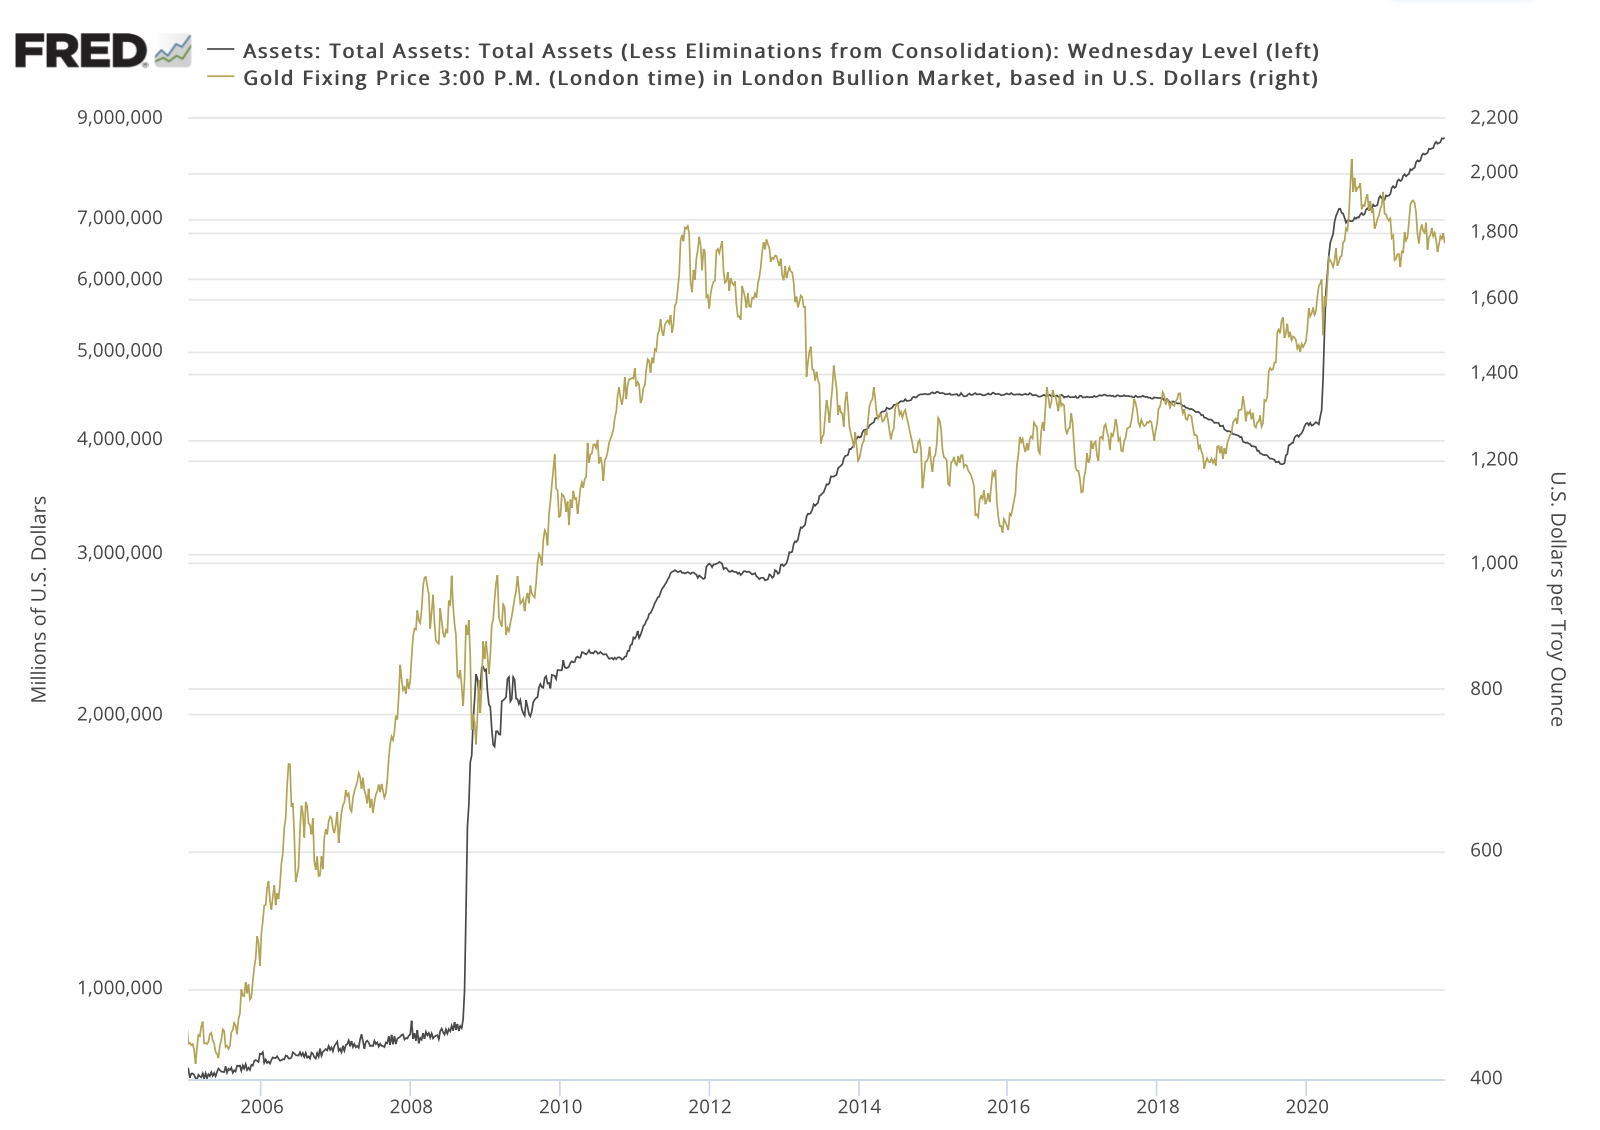 overlay line chart showing the Fed balance sheet and gold price 2005-present